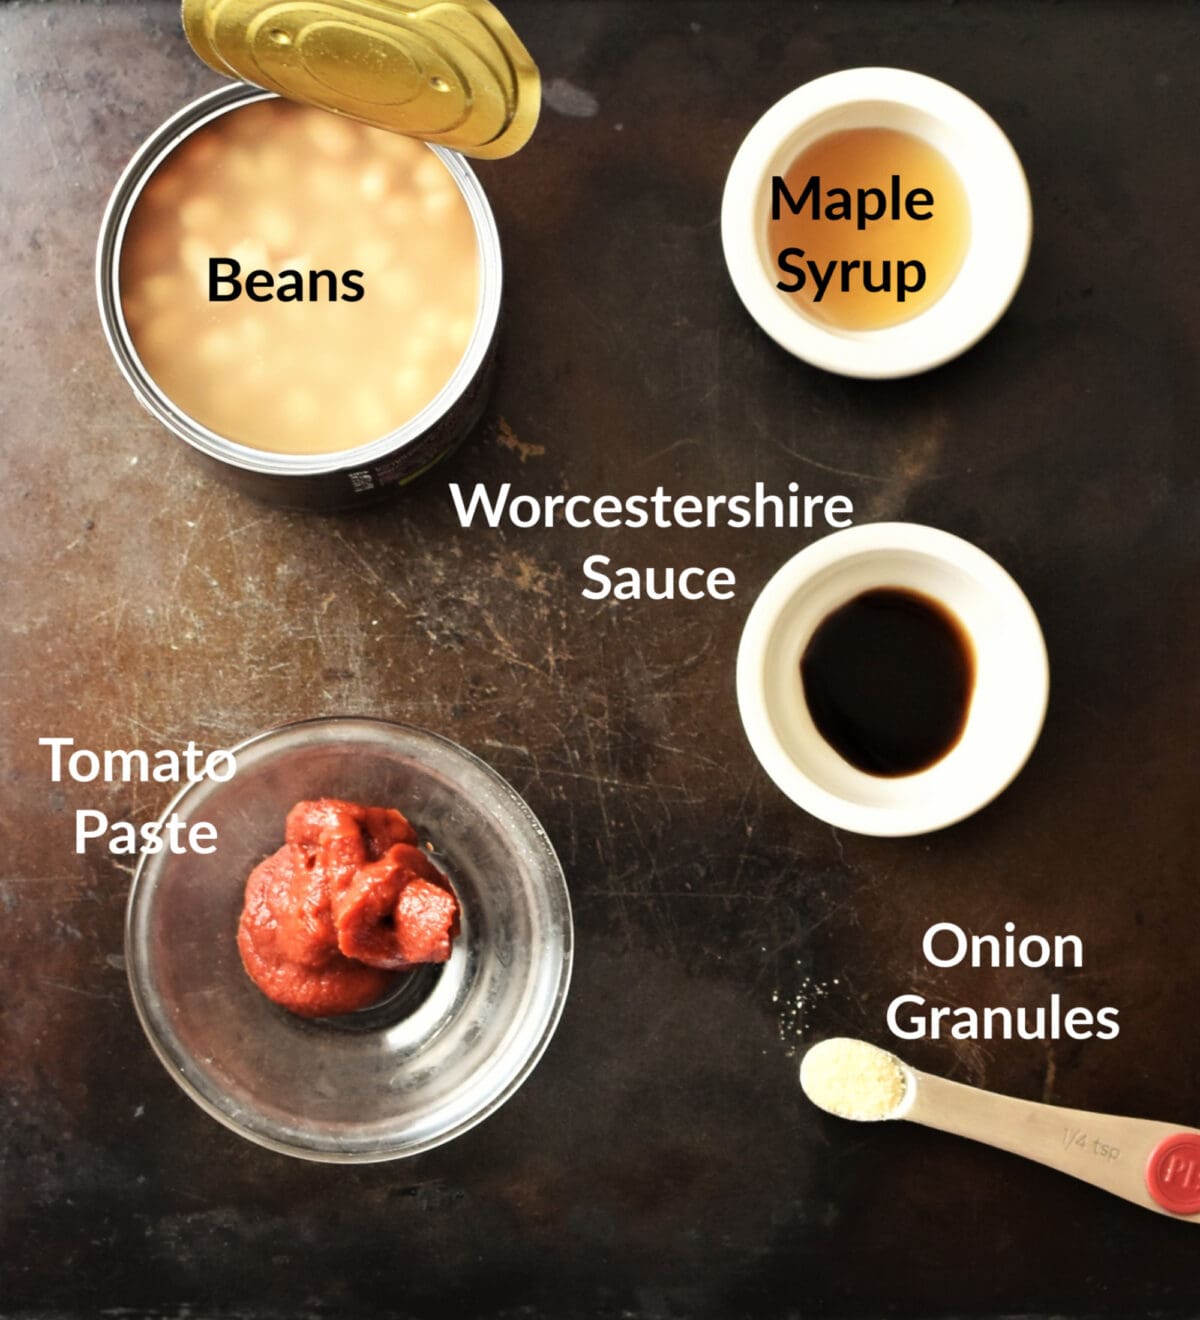 Baked beans ingredients in separate dishes.